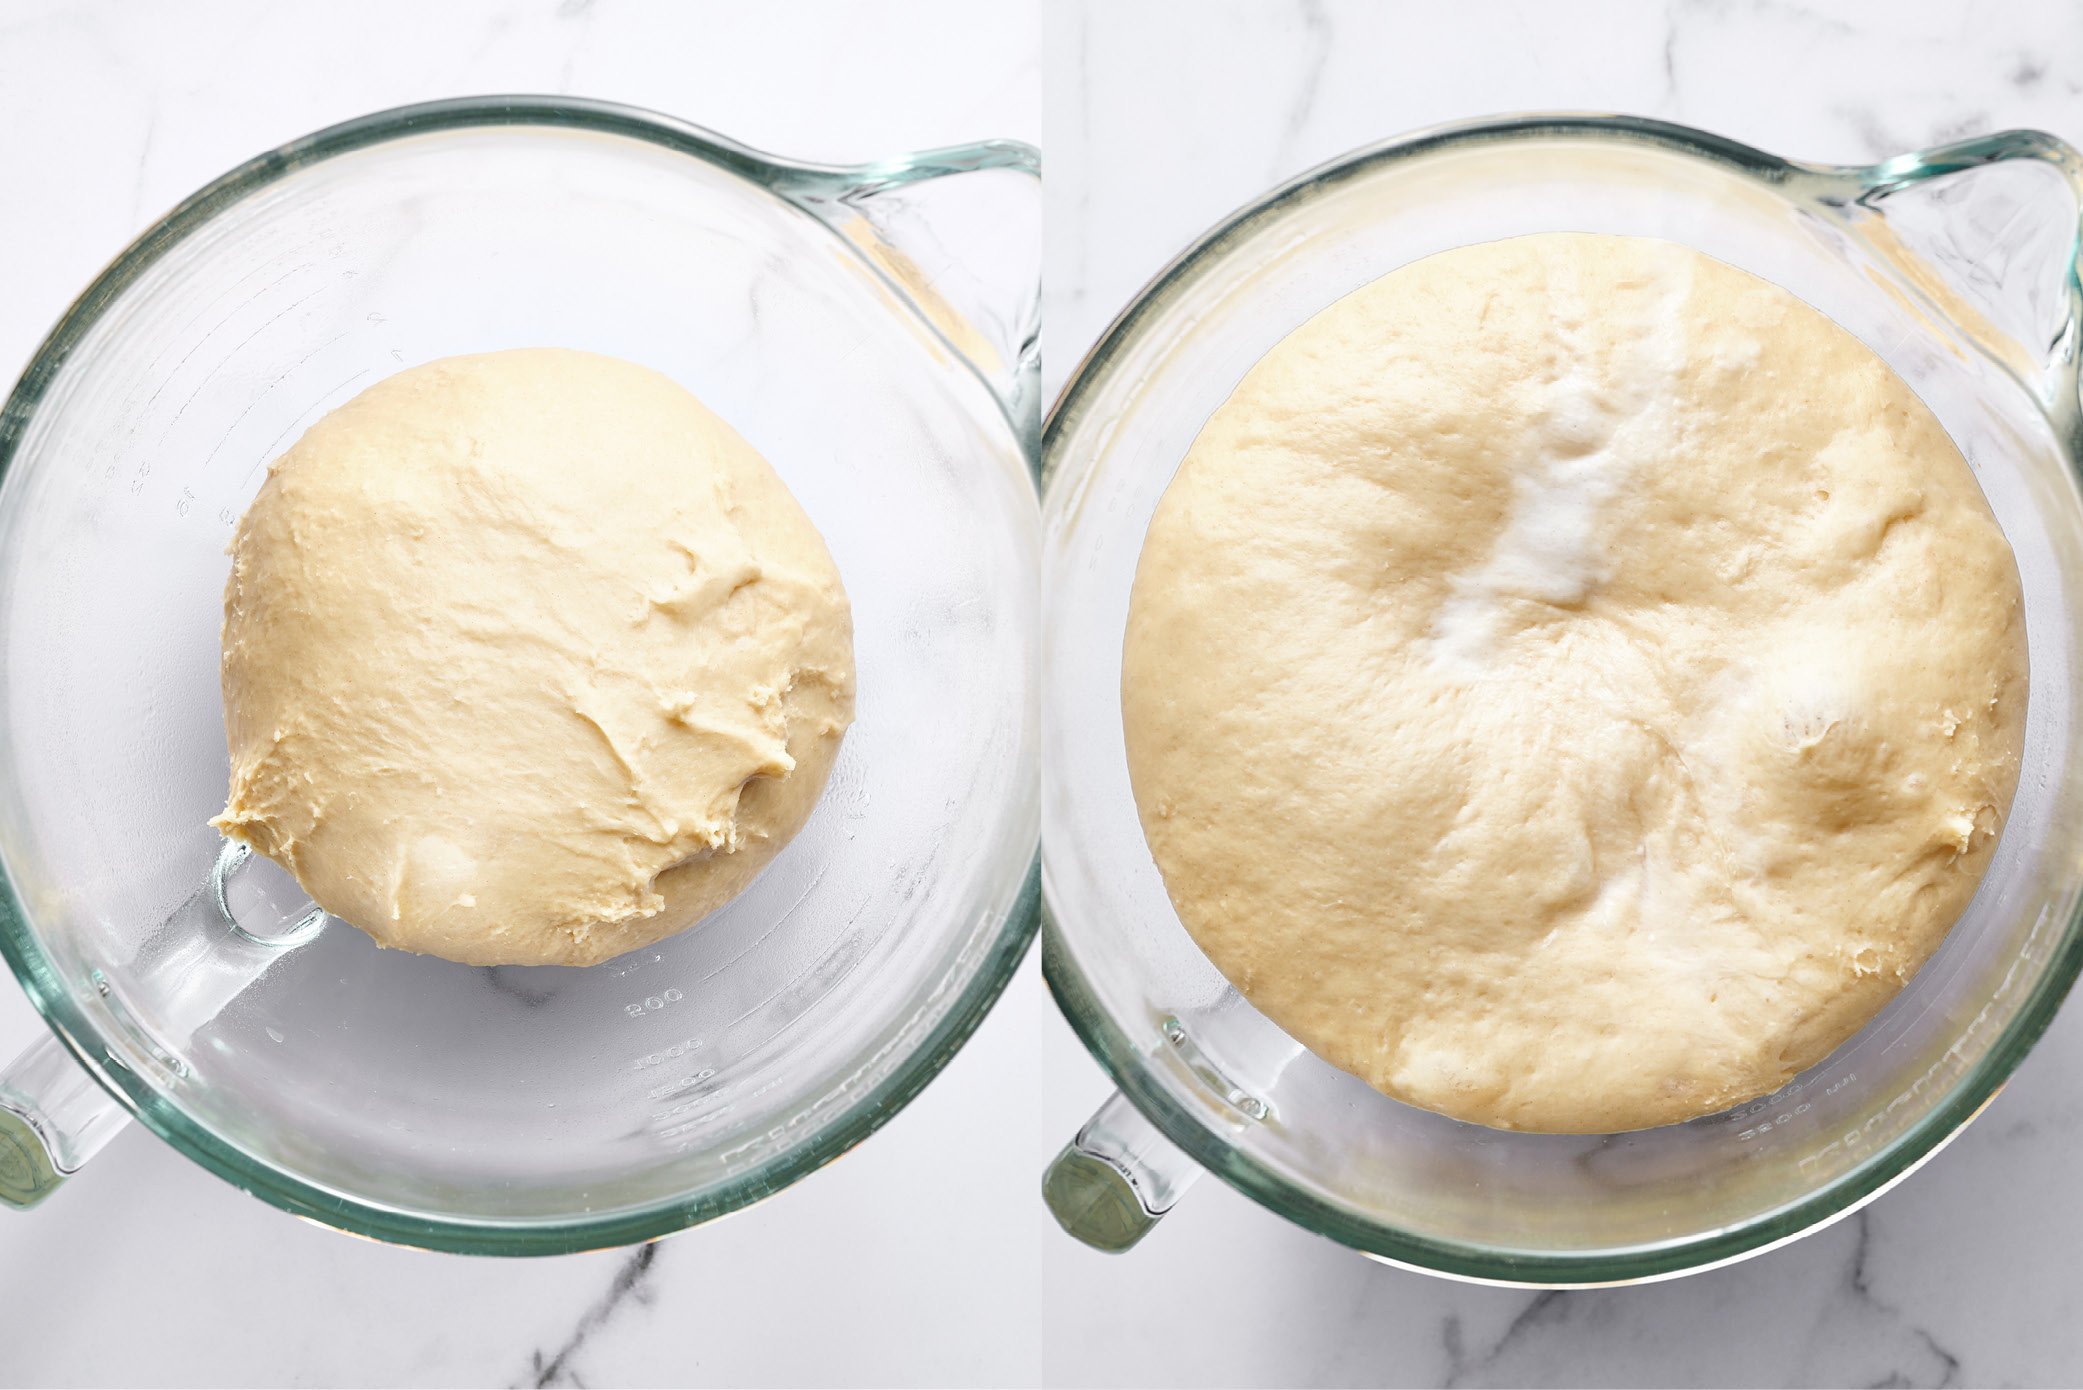 dough before and after rising.